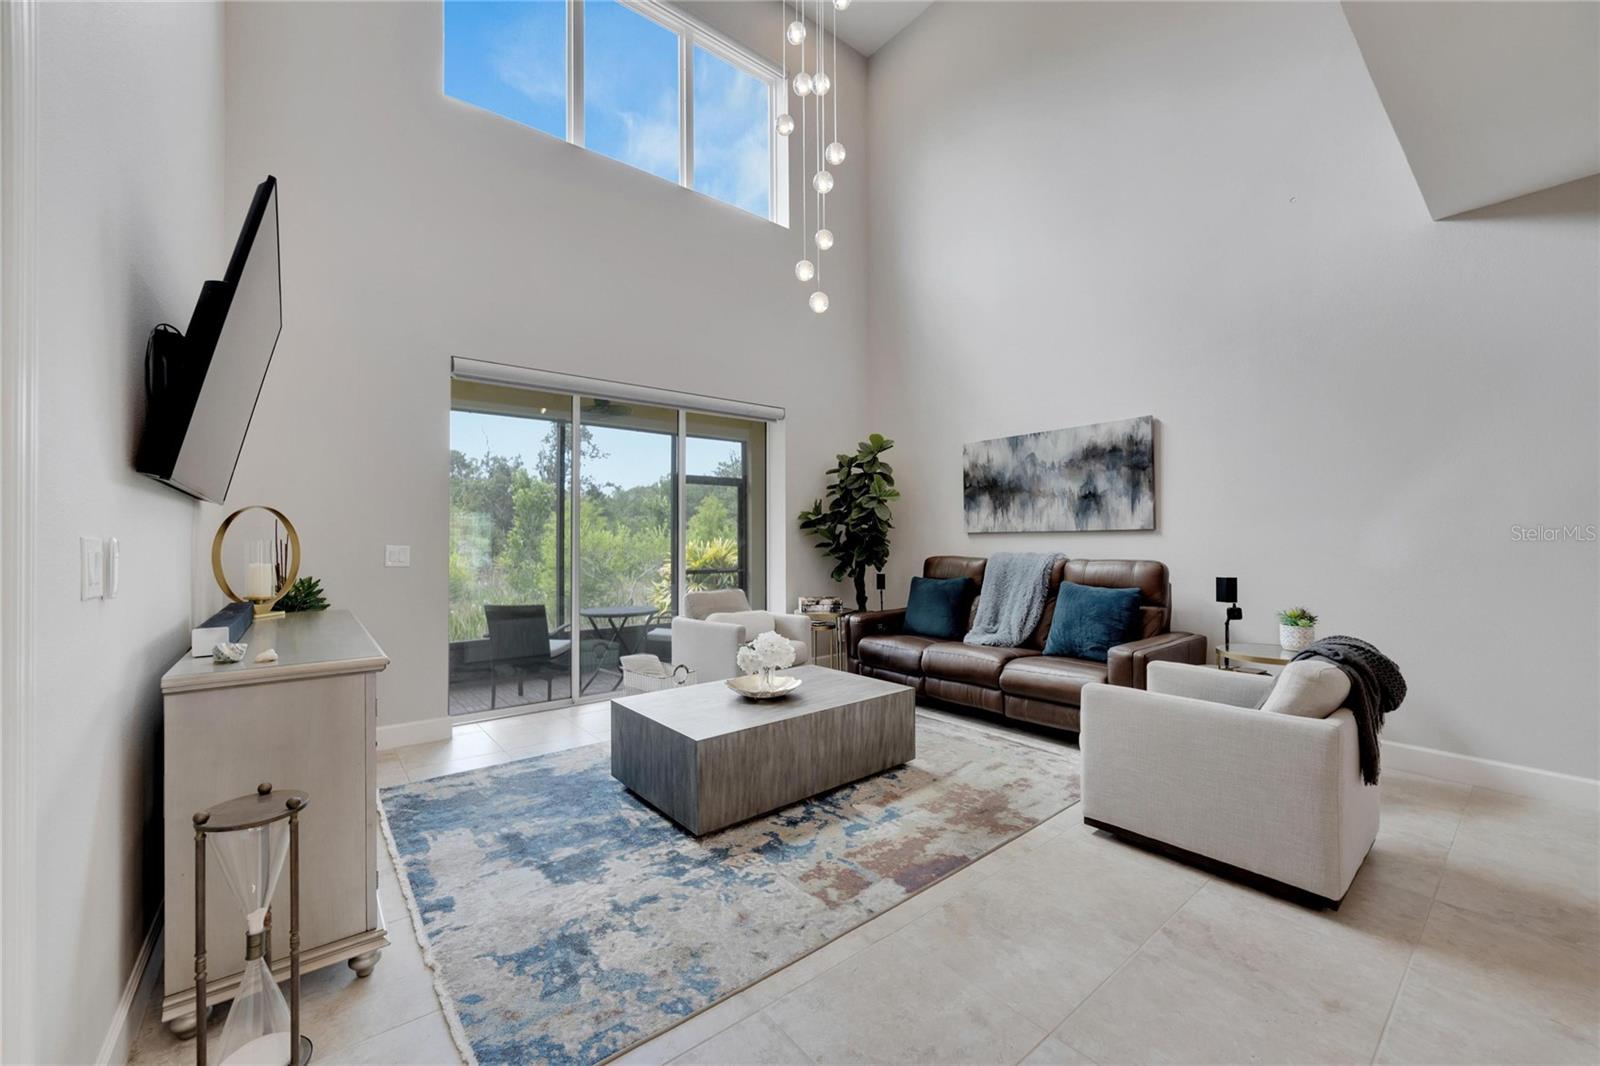 Living room with great conservation views at 12306 Terracina Chase Ct, Tampa, FL 33625